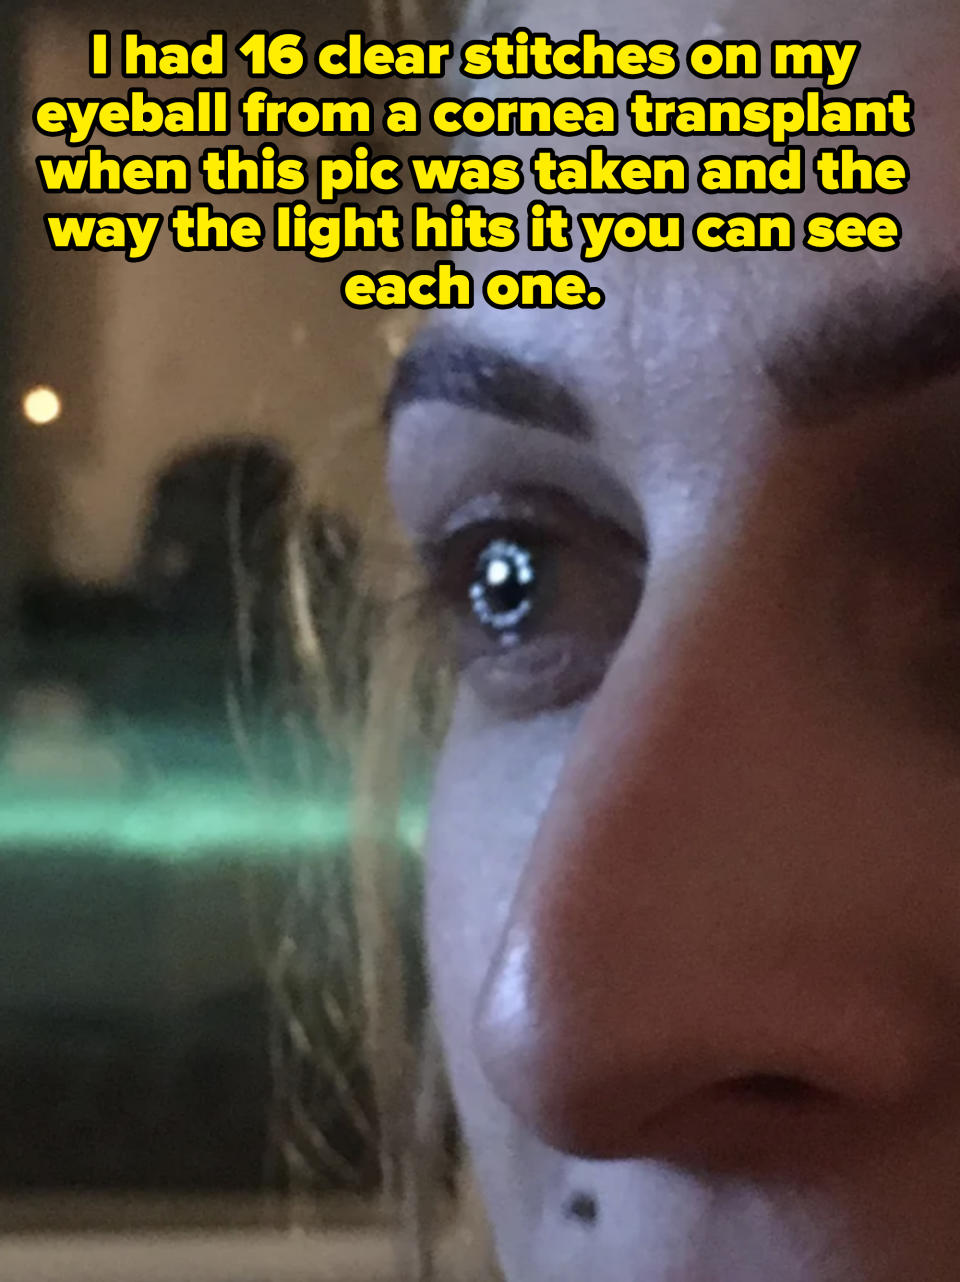 Close-up of a person's eye and part of their nose, with a reflection of light visible in the eye